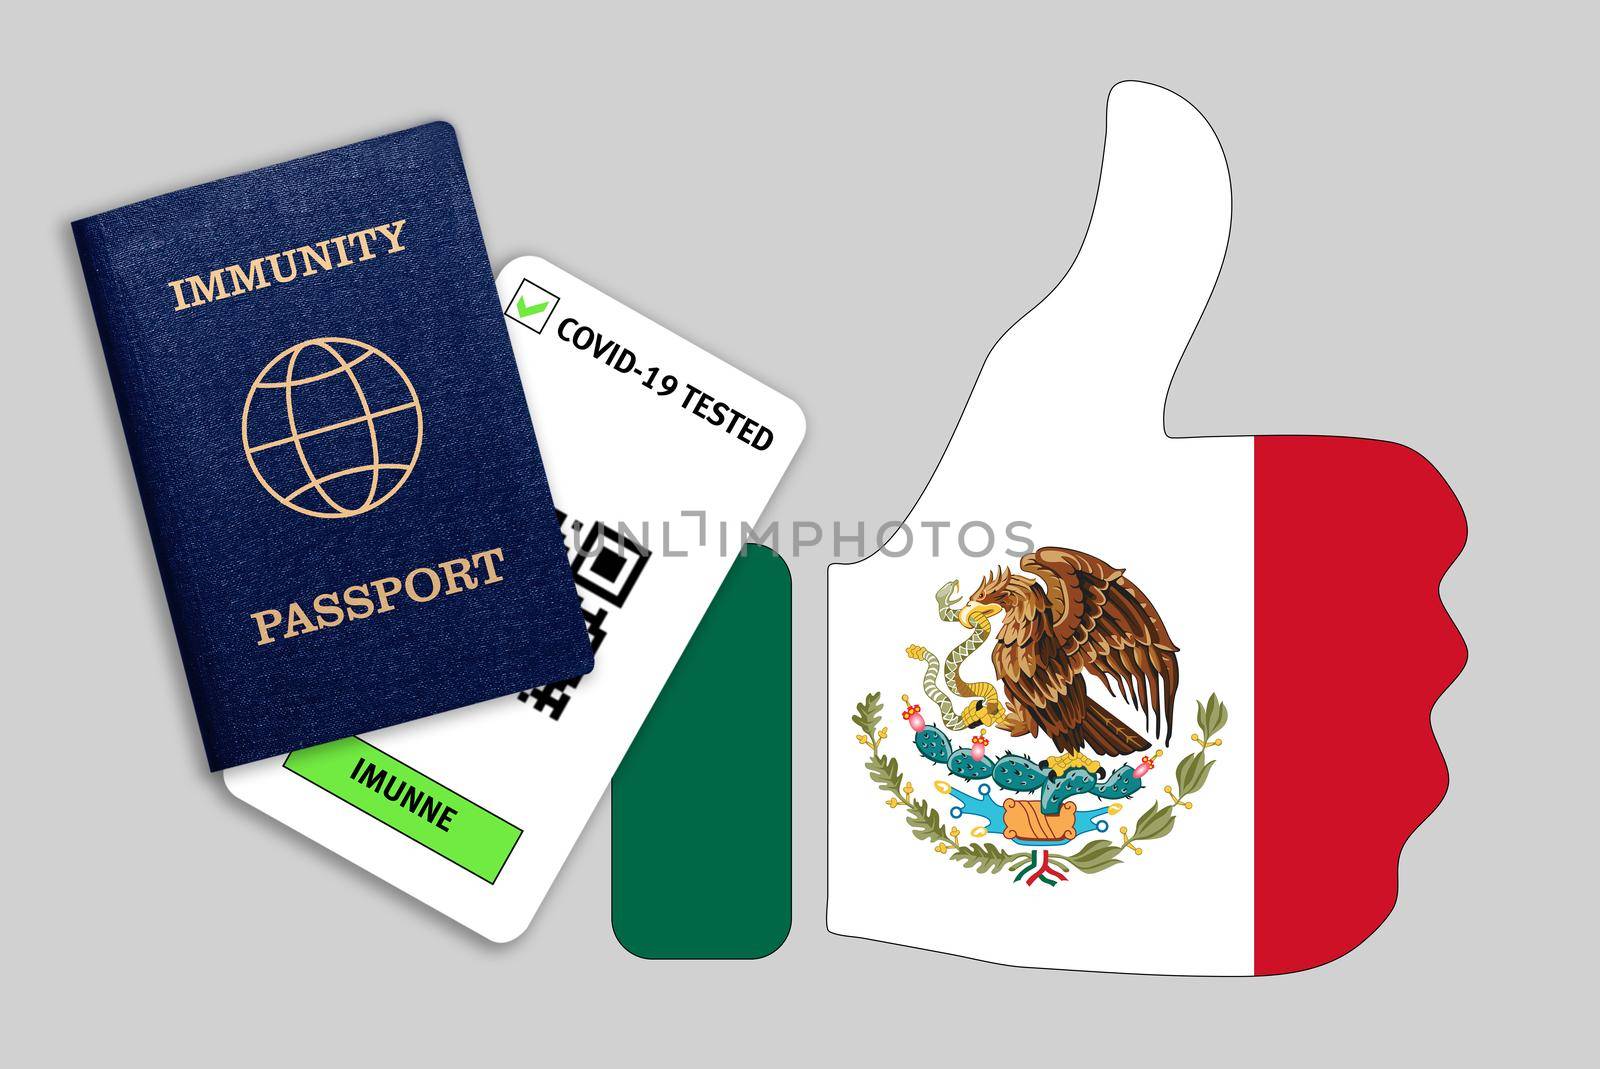 Immune passport and coronavirus test with thumb up with flag of Mexico. Concept of immunity to COVID-19. Certificate for people who have had coronavirus or made vaccine.